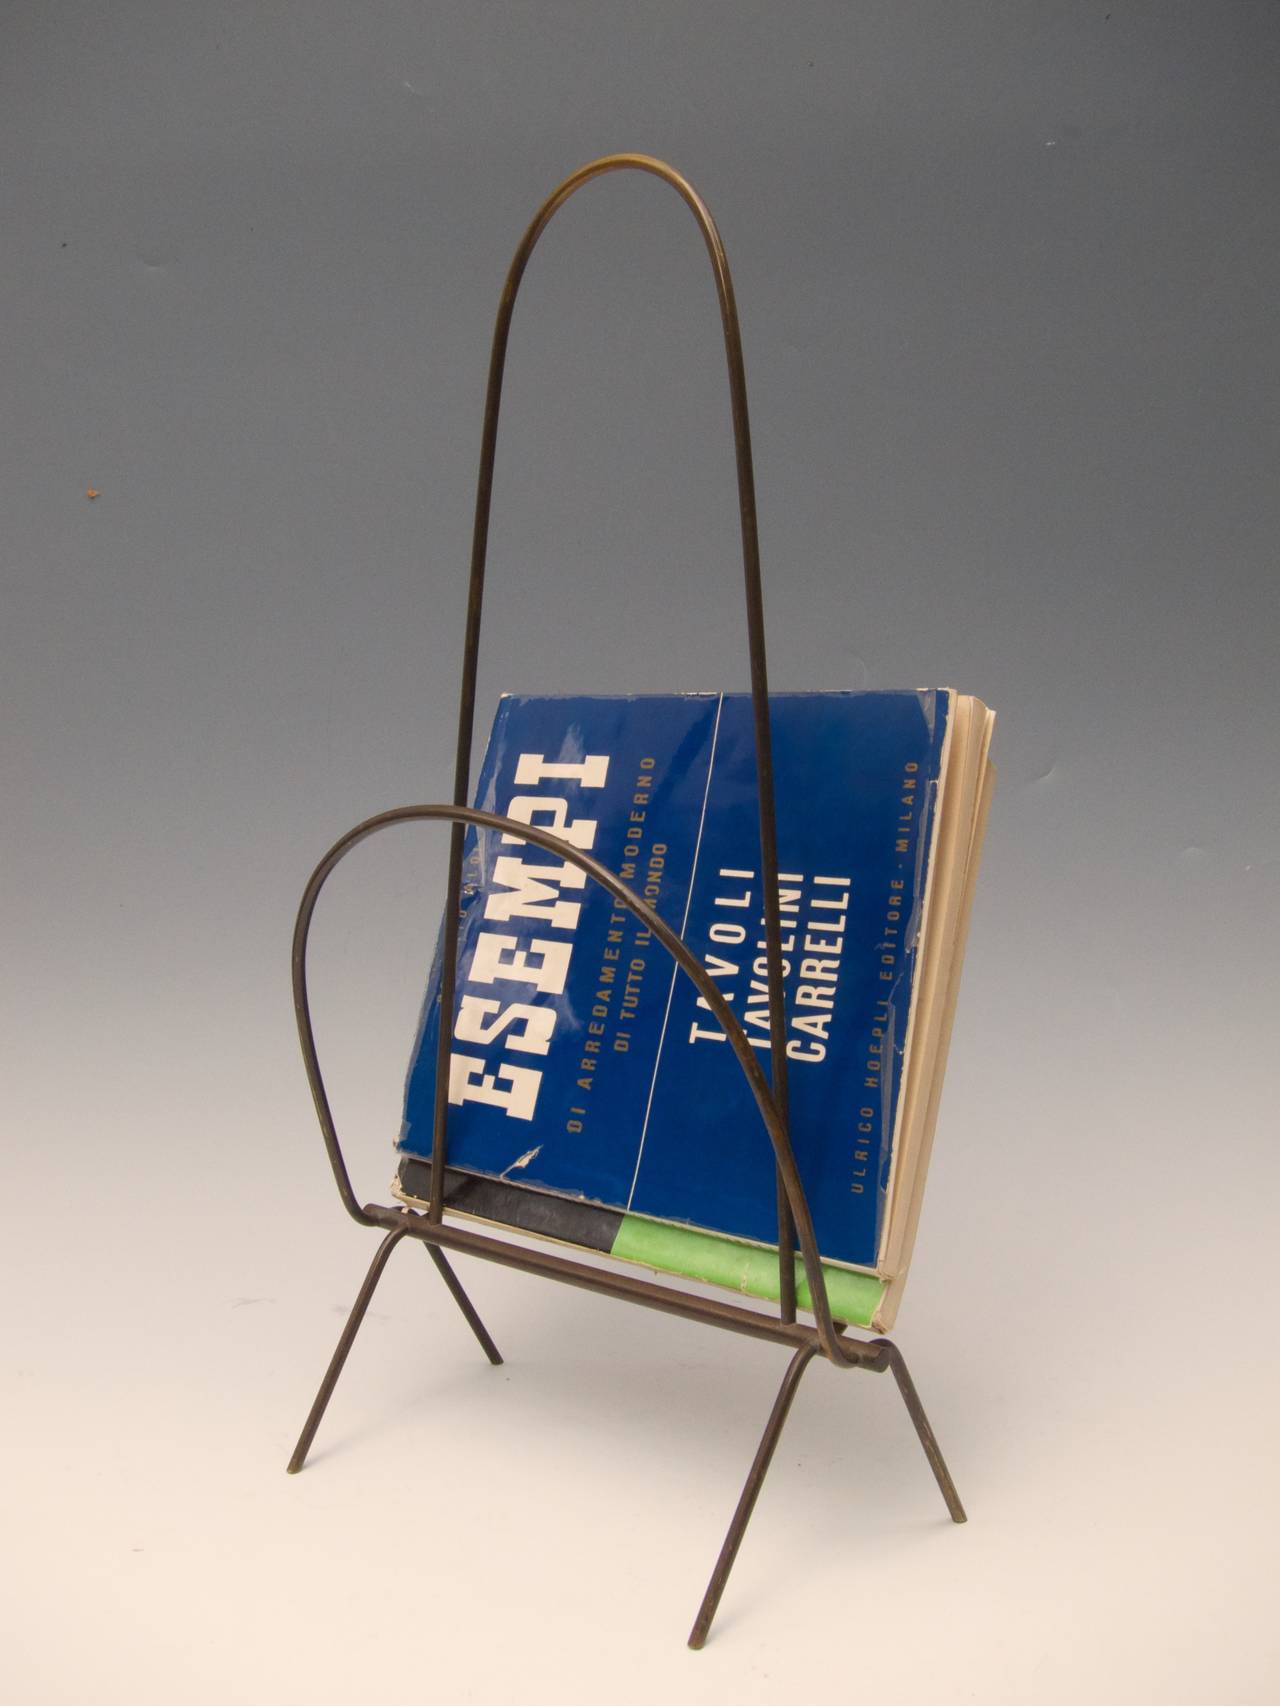 Rare Magazine Rack / newspaper holder by Carl Auböck
Patinated brass
Stamped with the Auböck logo.

1950´s

29 x 18,5 cm, h 55,3 cm / 11,42 x 7,28 in, h 21,77 in